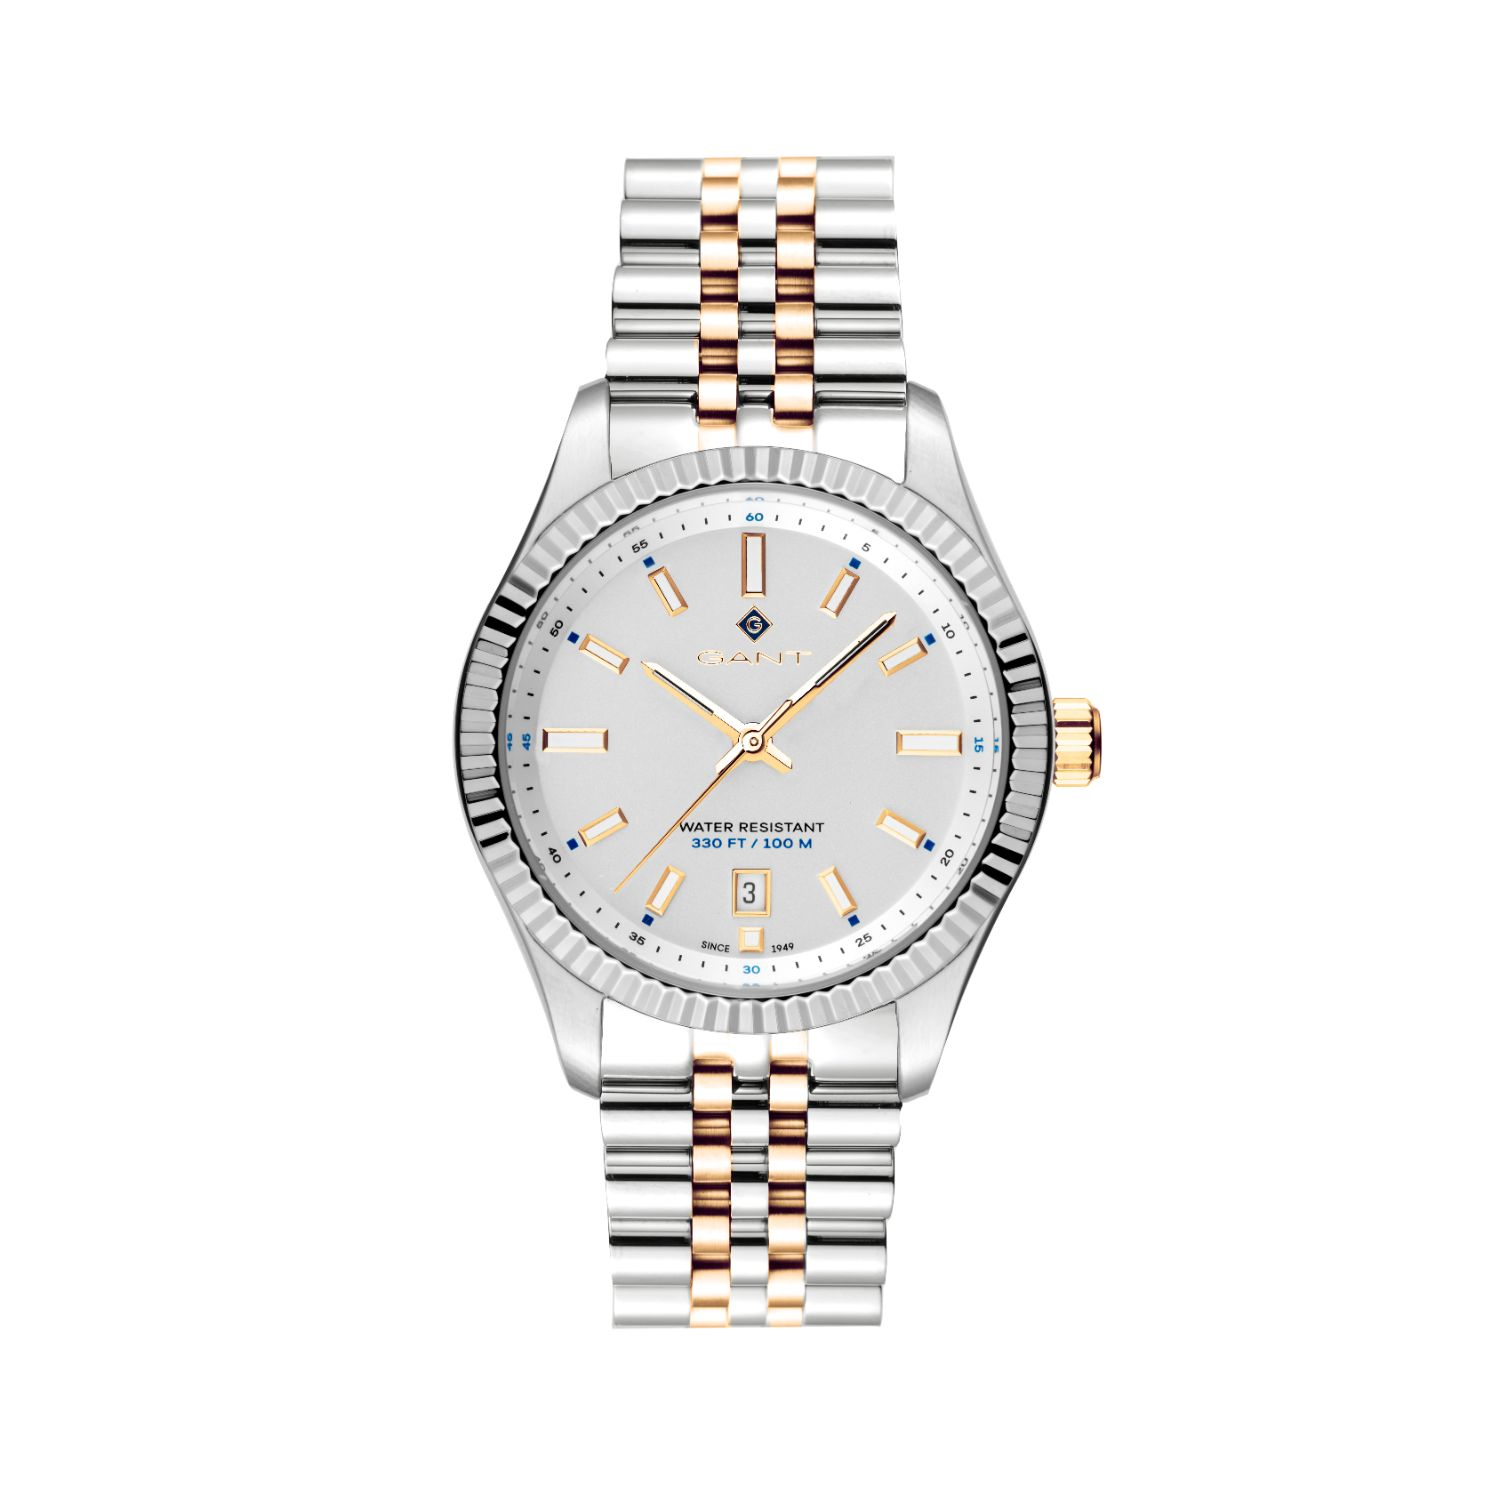 Womens Gant watch in two-tone stainless steel with white dial and bracelet.